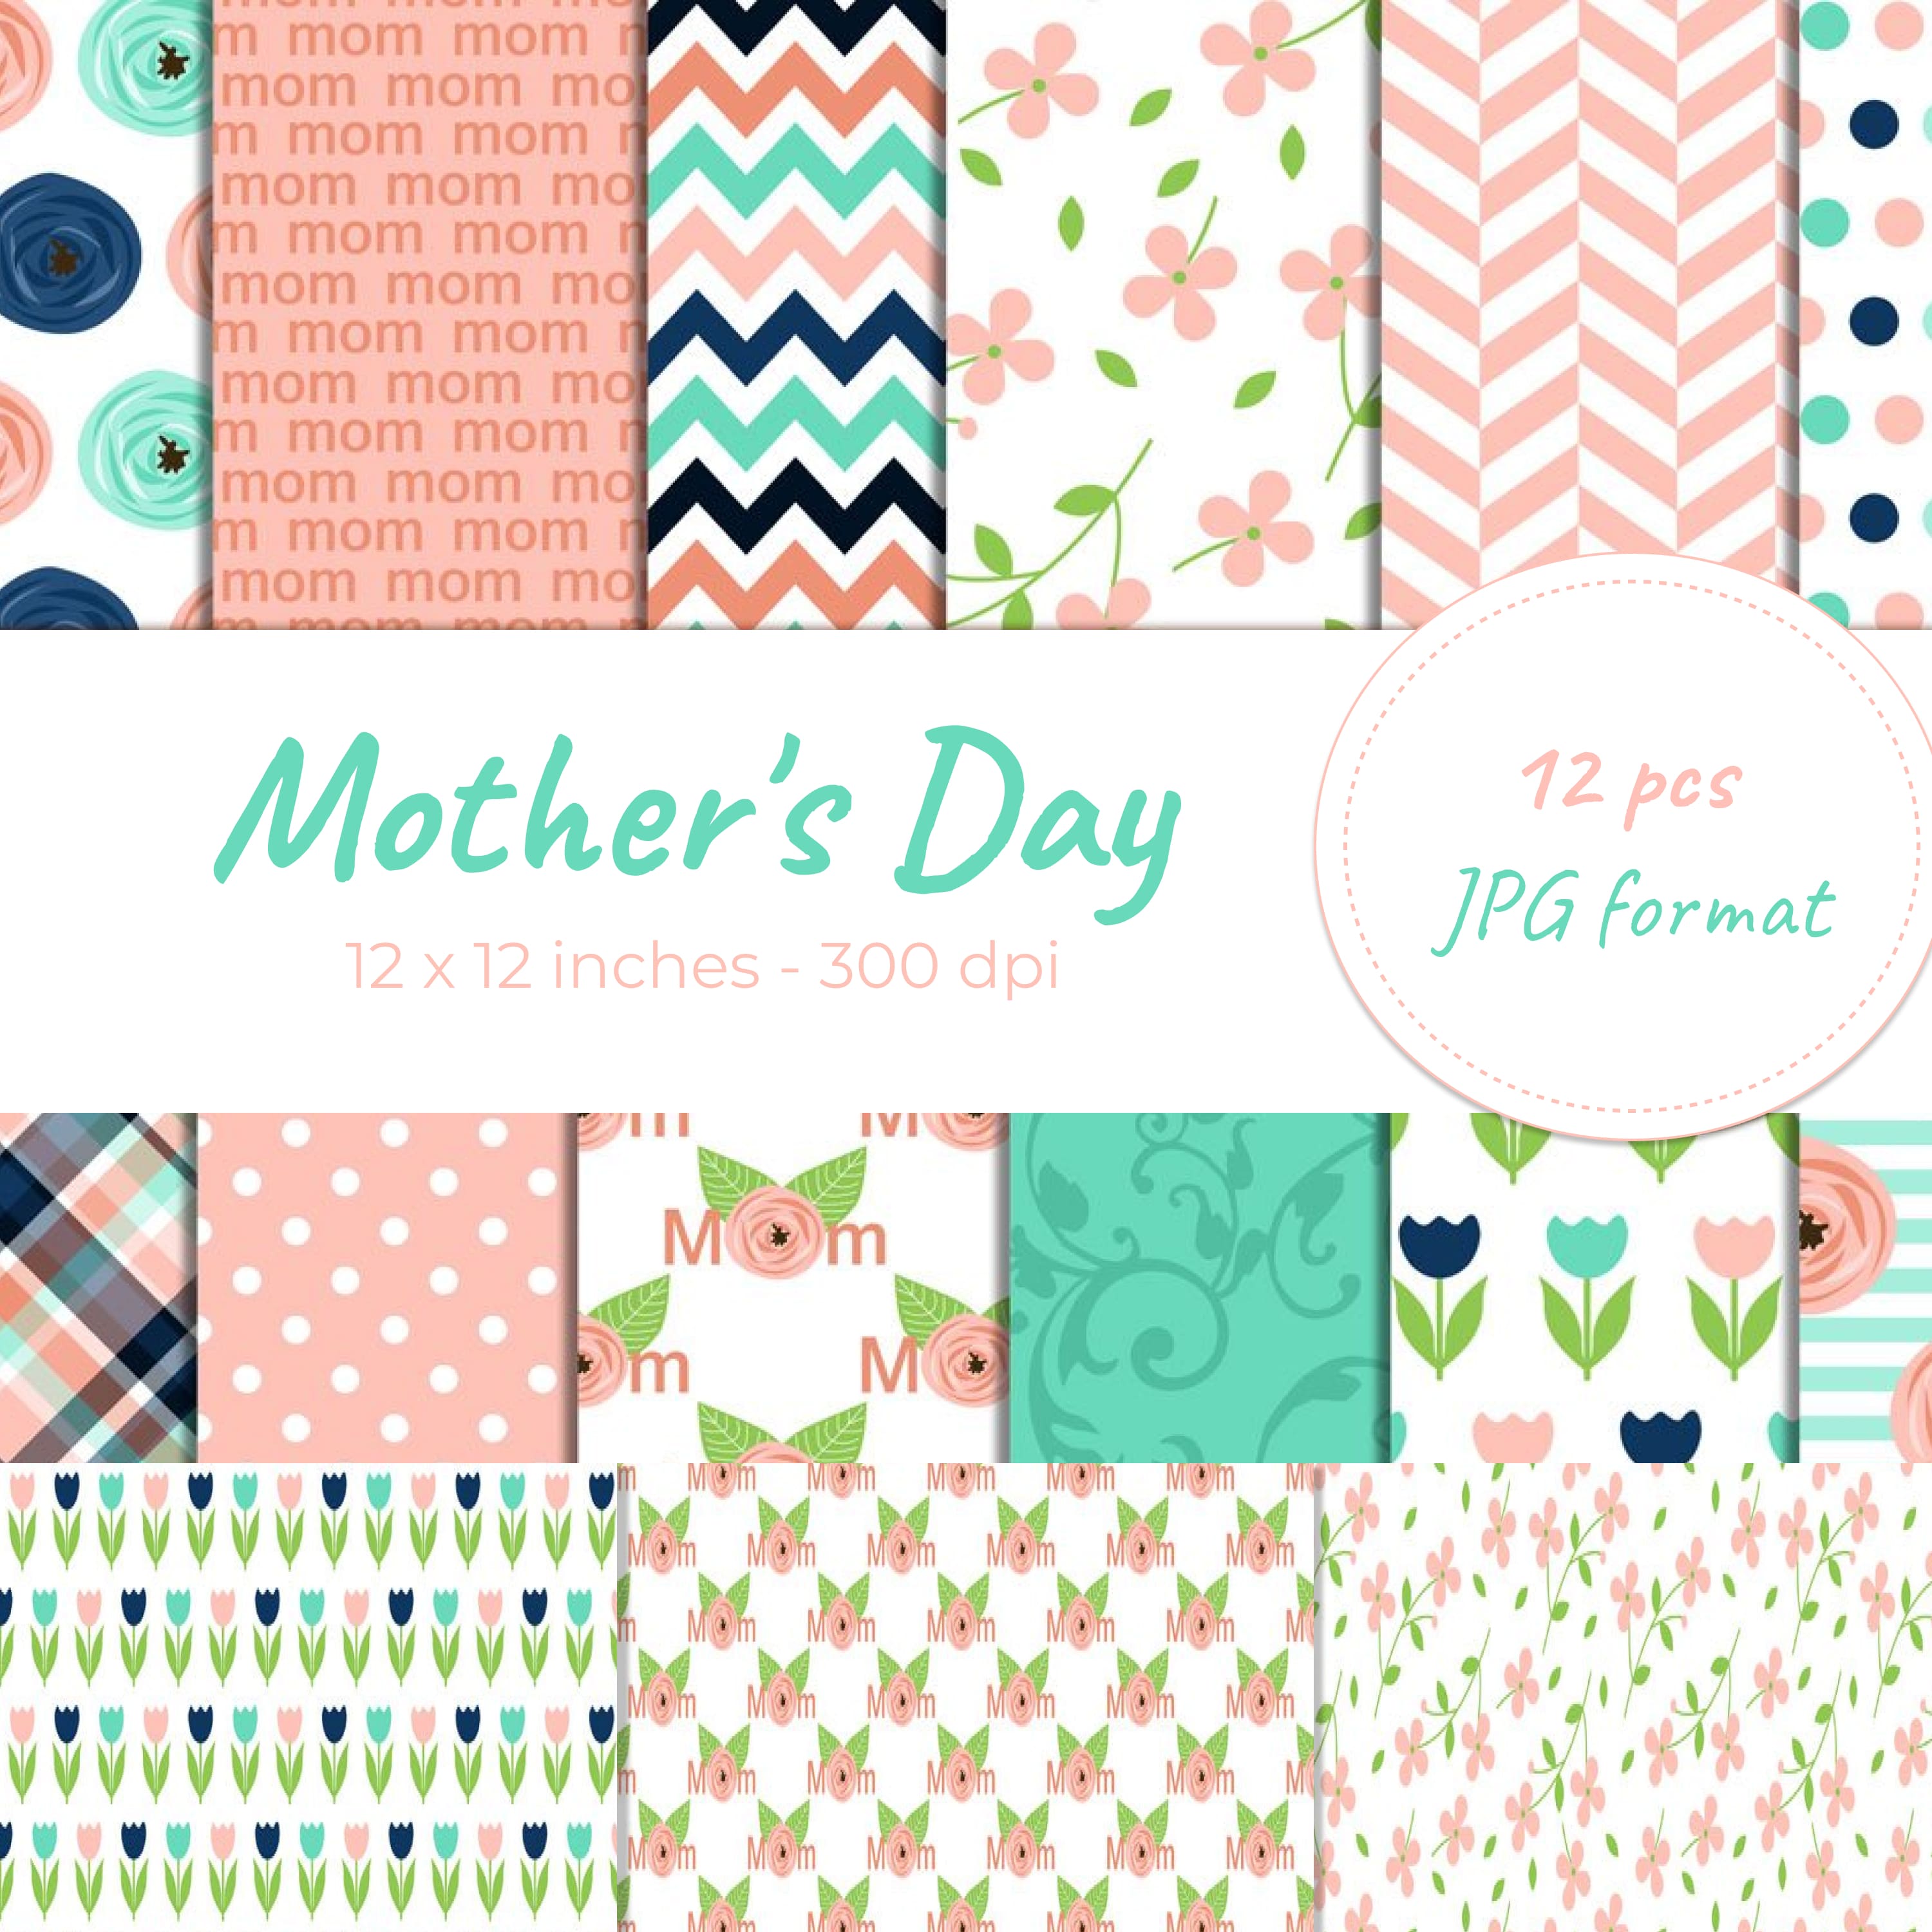 Mother's Day Digital Papers cover.